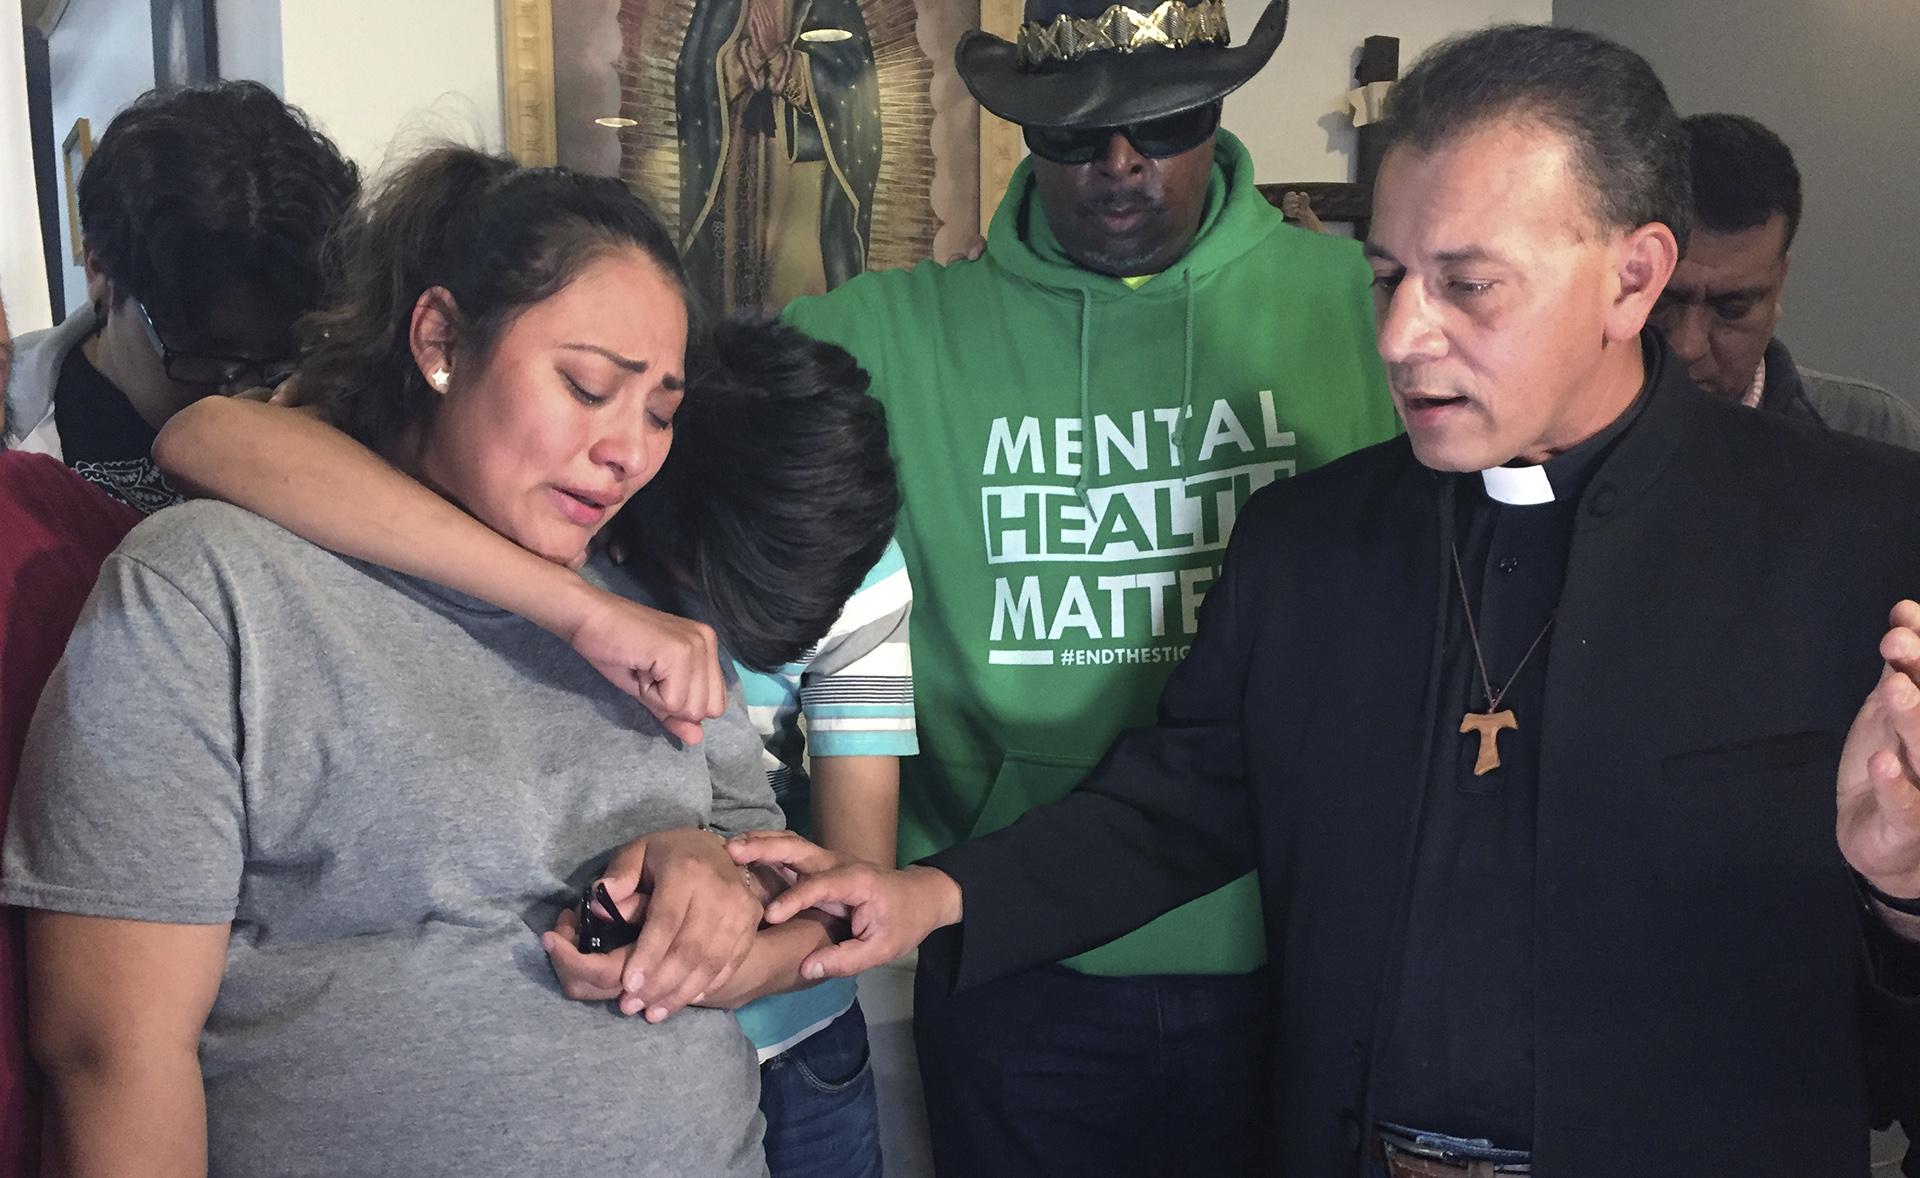 In this Tuesday, May 21, 2019 photo provided by WBEZ Radio is Adilene Marquina, left, as she sobs after announcing she will be seeking sanctuary inside Faith, Life and Hope Mission church on Chicago's Southwest Side. Hugging her is her son, Johan as Rev. Jose Landaverde, right, comforts her. (María Ines Zamudio / WBEZ Radio via AP)